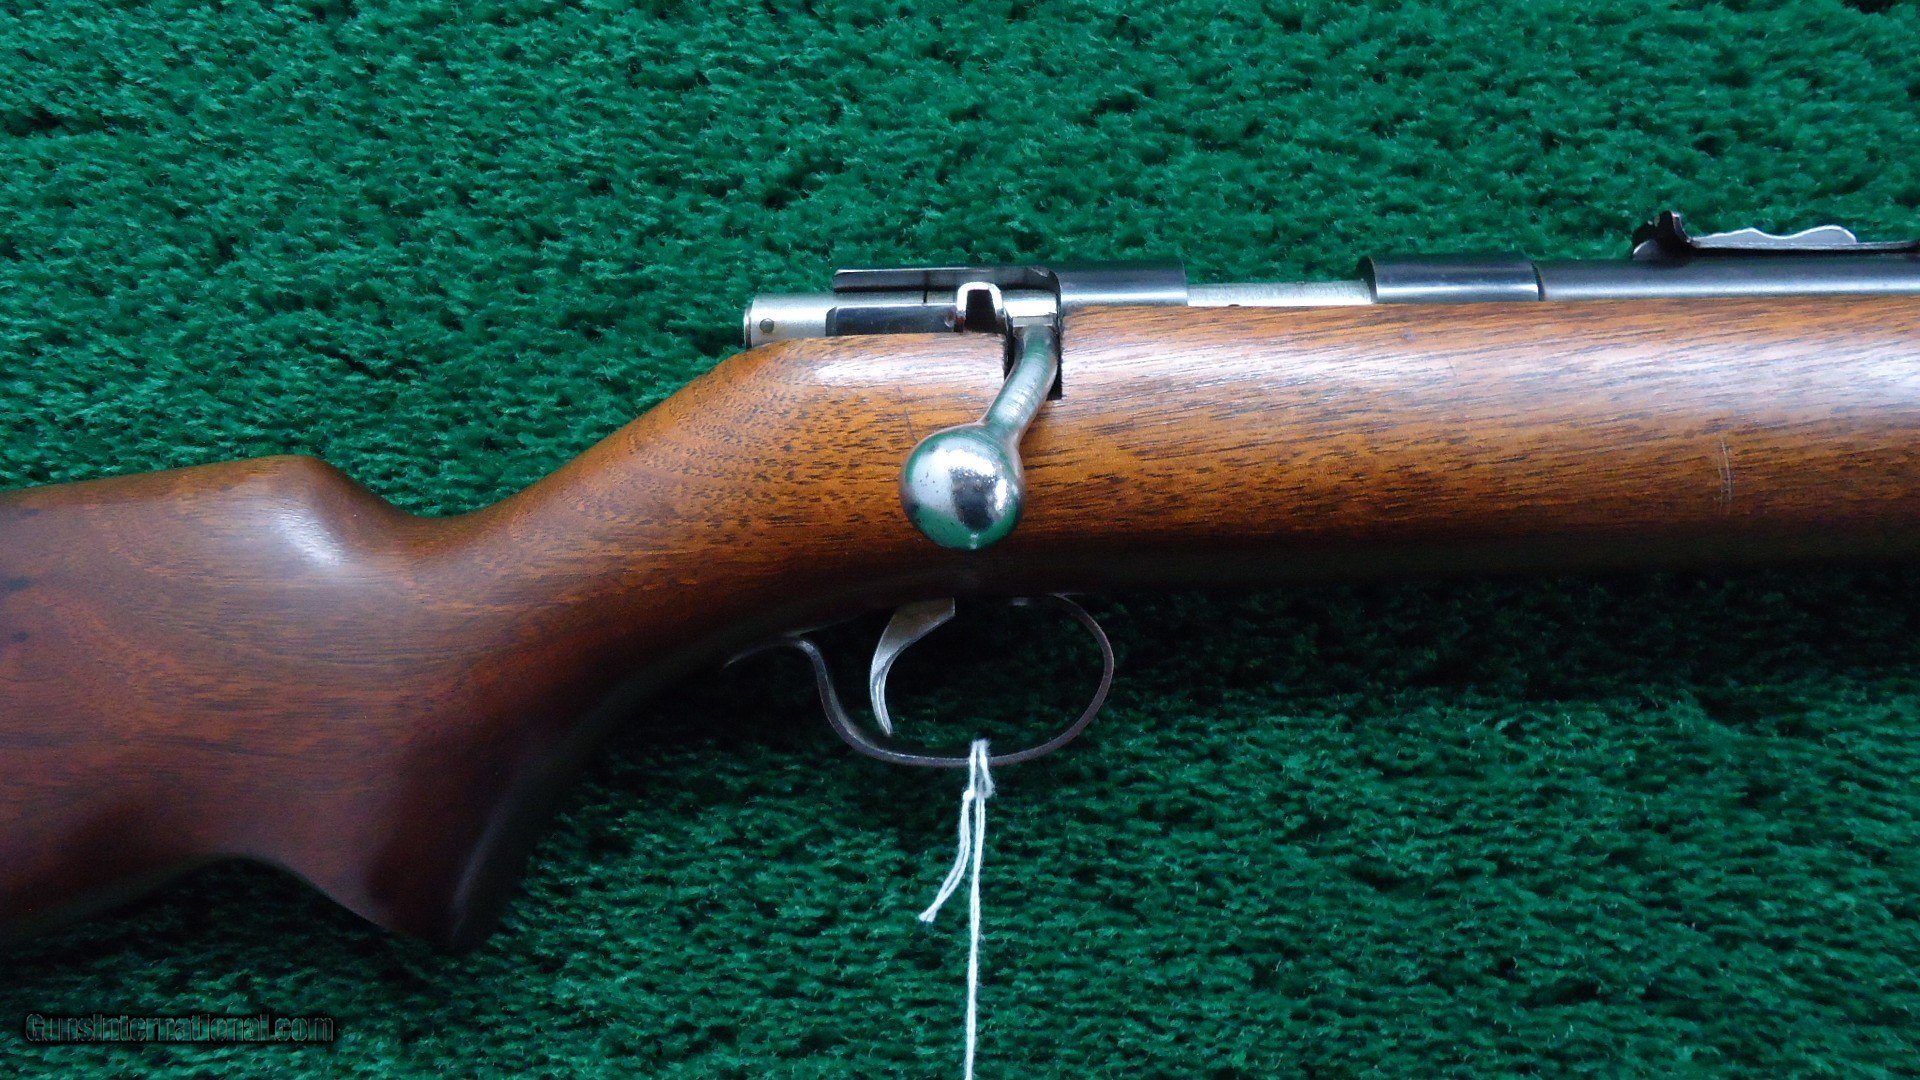 Winchester Model Cal Bolt Action Rifle For Sale At Gunauction | My XXX ...